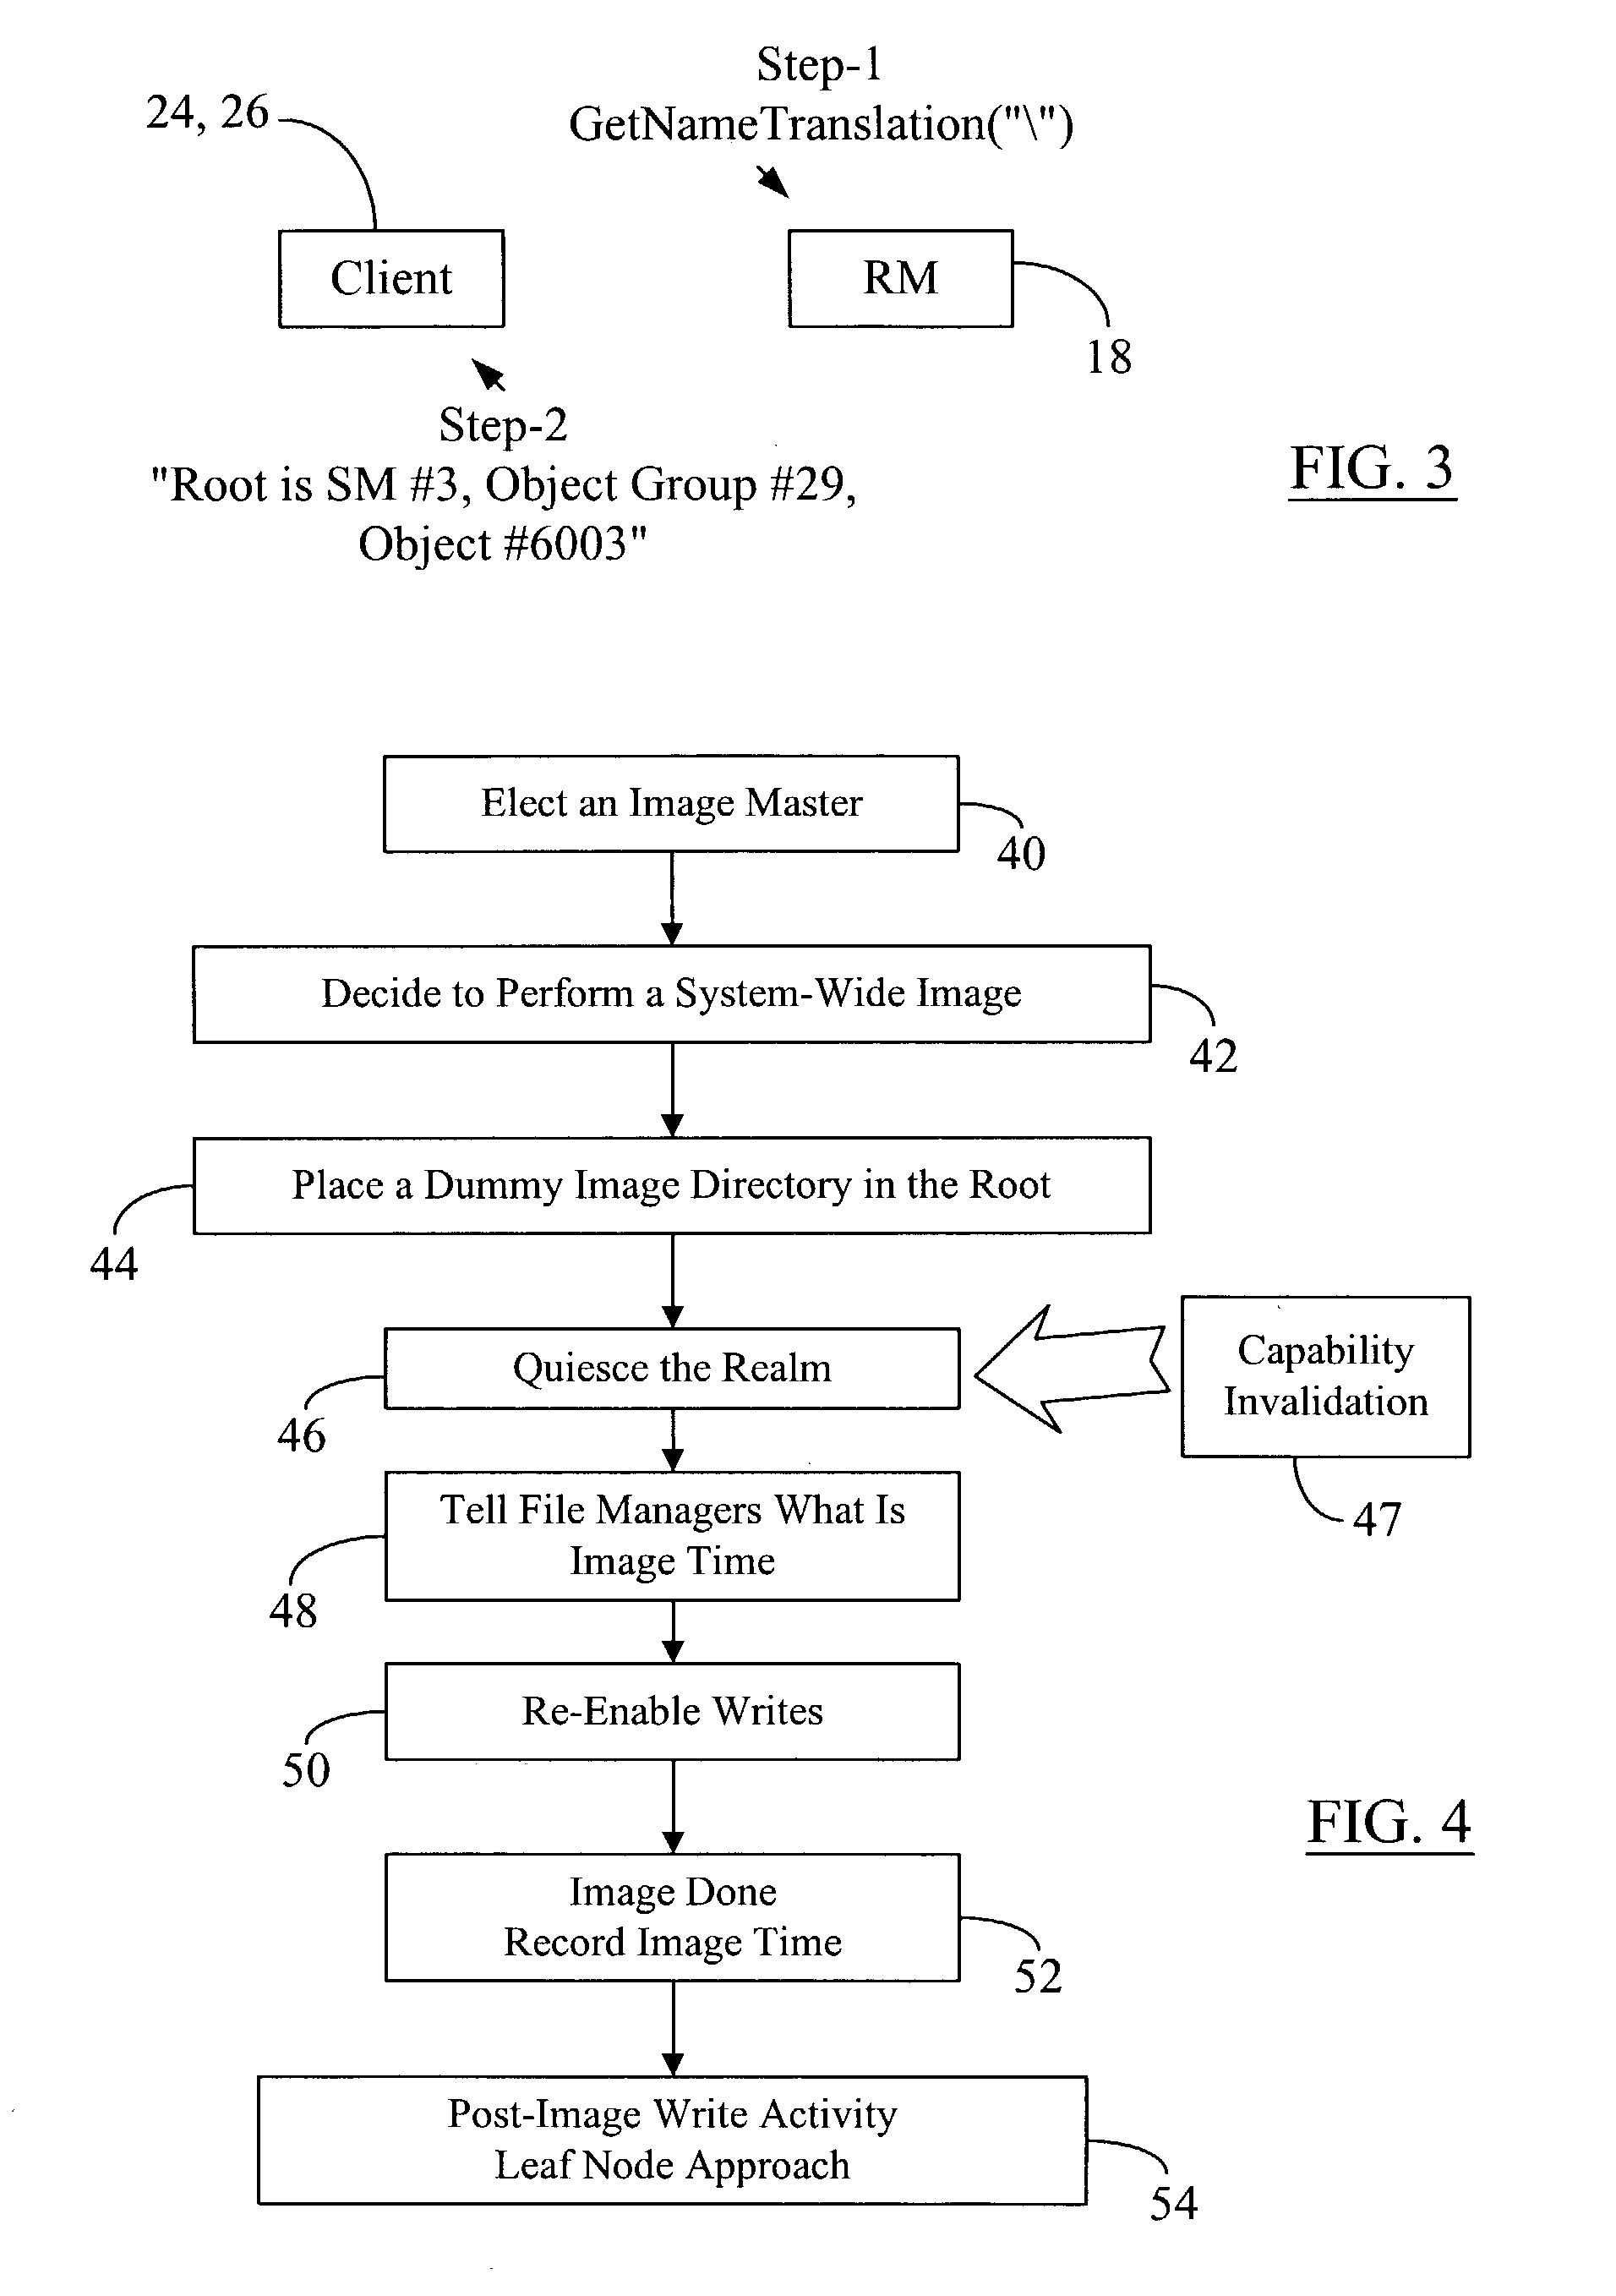 Internally consistent file system image in distributed object-based data storage